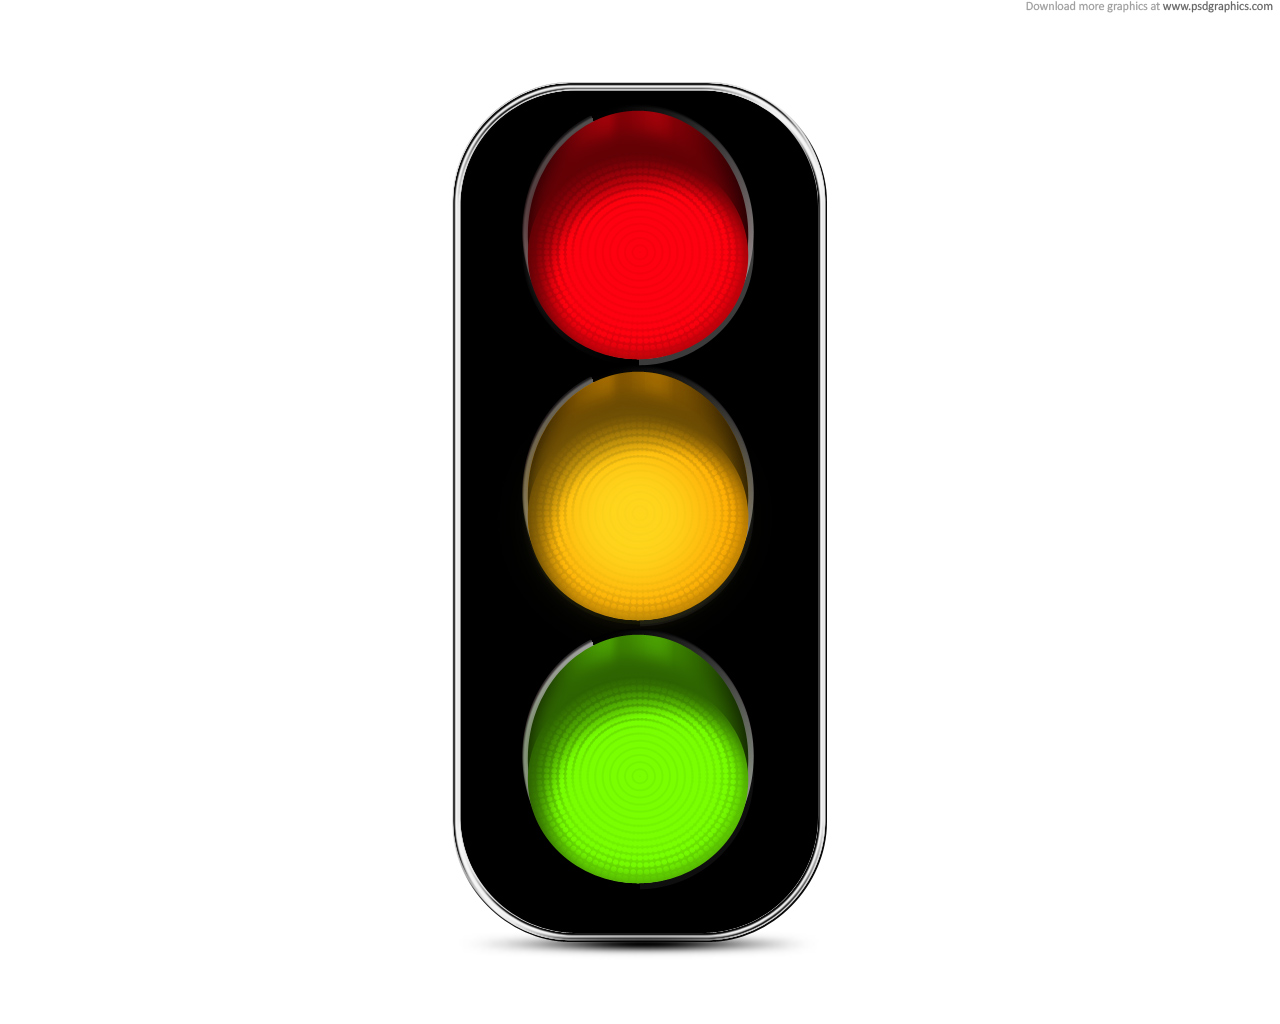 Green Stoplight - ClipArt Best | Clipart Panda - Free Clipart Images